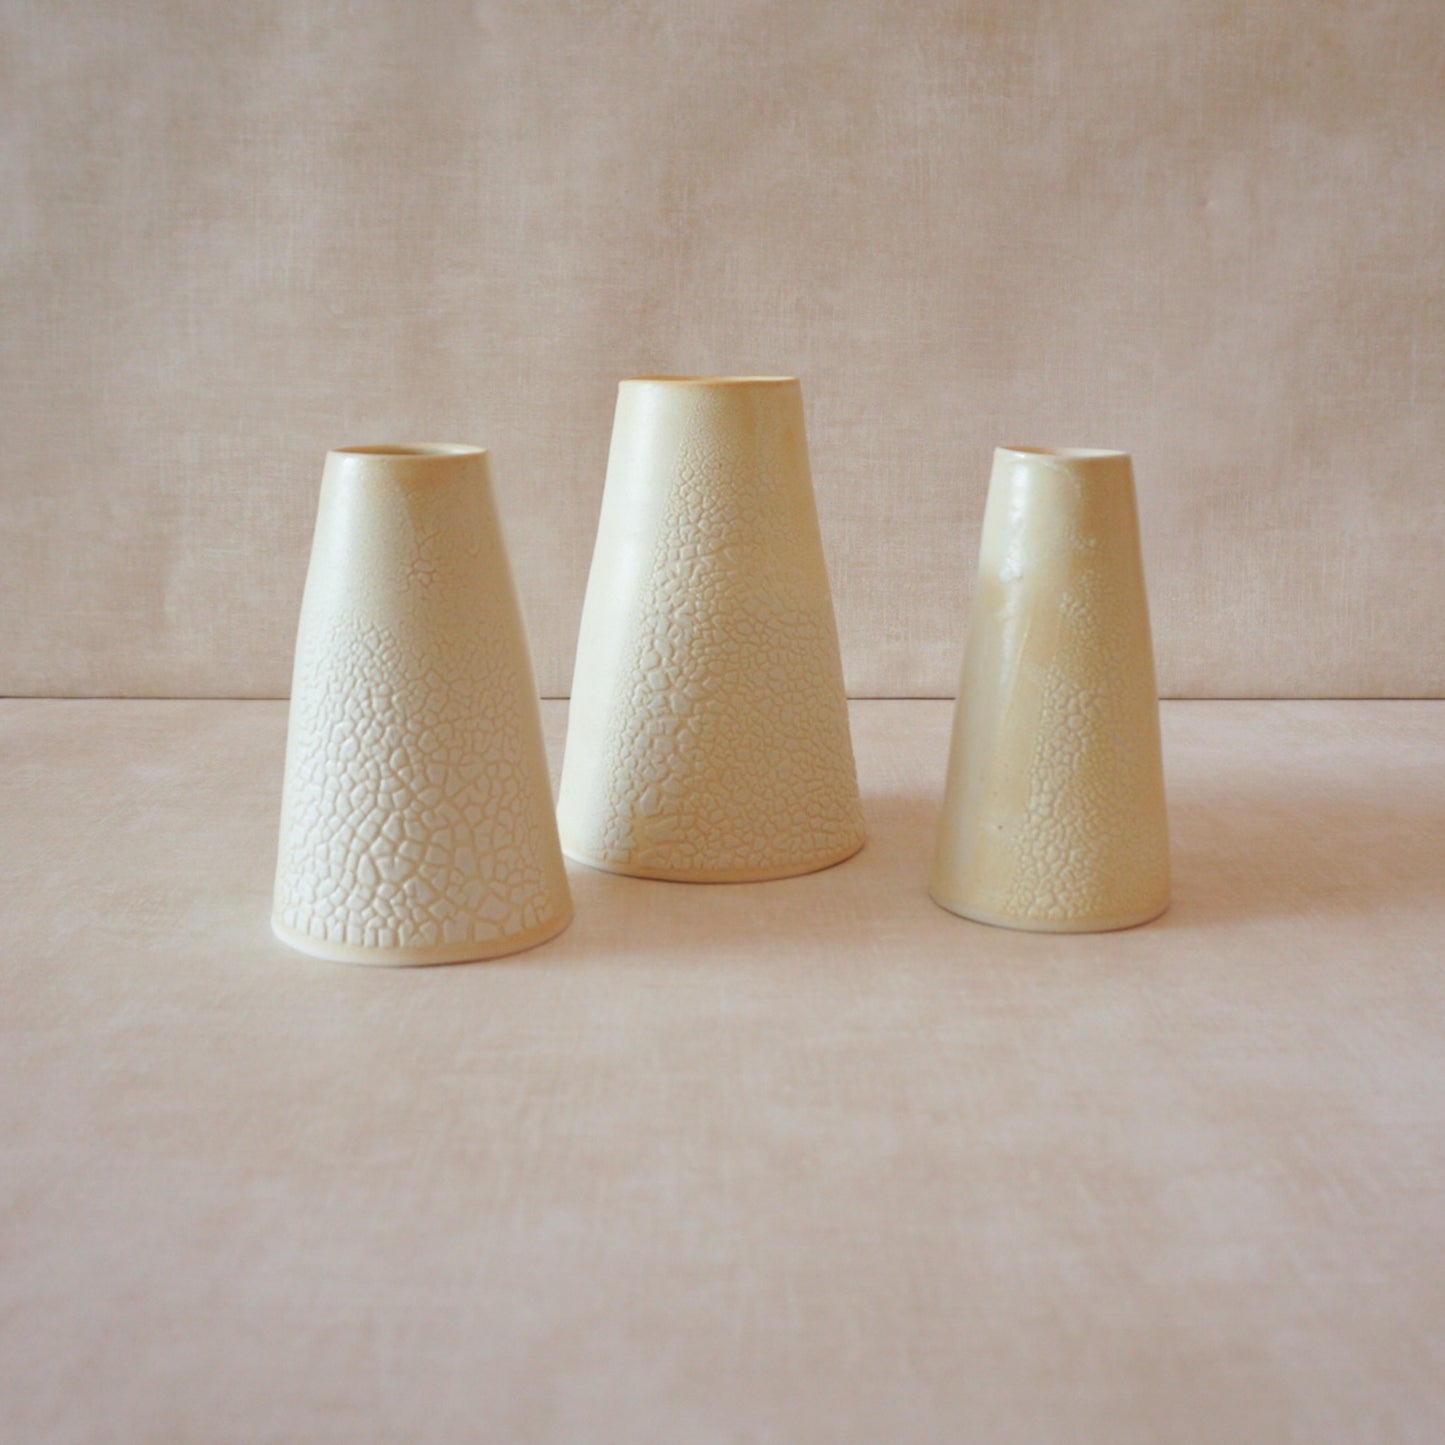 Handmade cone-shaped vase with unique texture and design